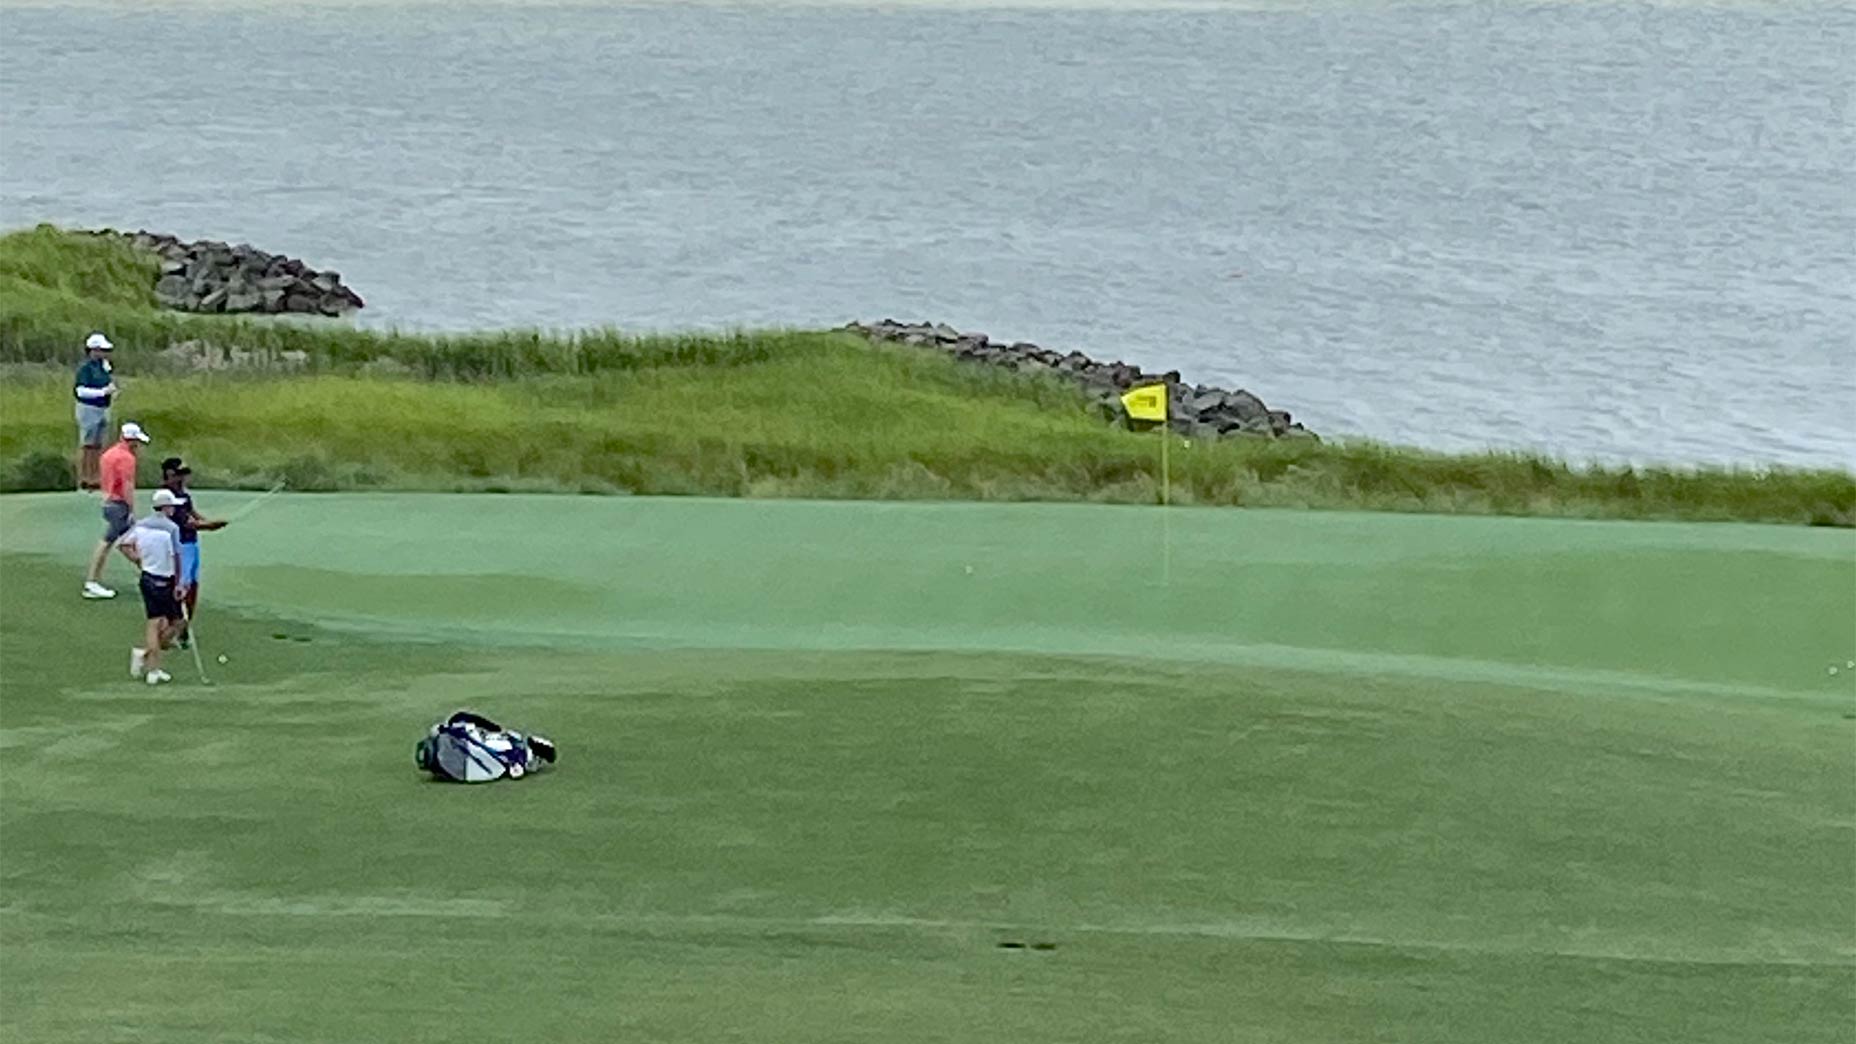 No fans allowed at the RBC Heritage, but some vacationers got really lucky